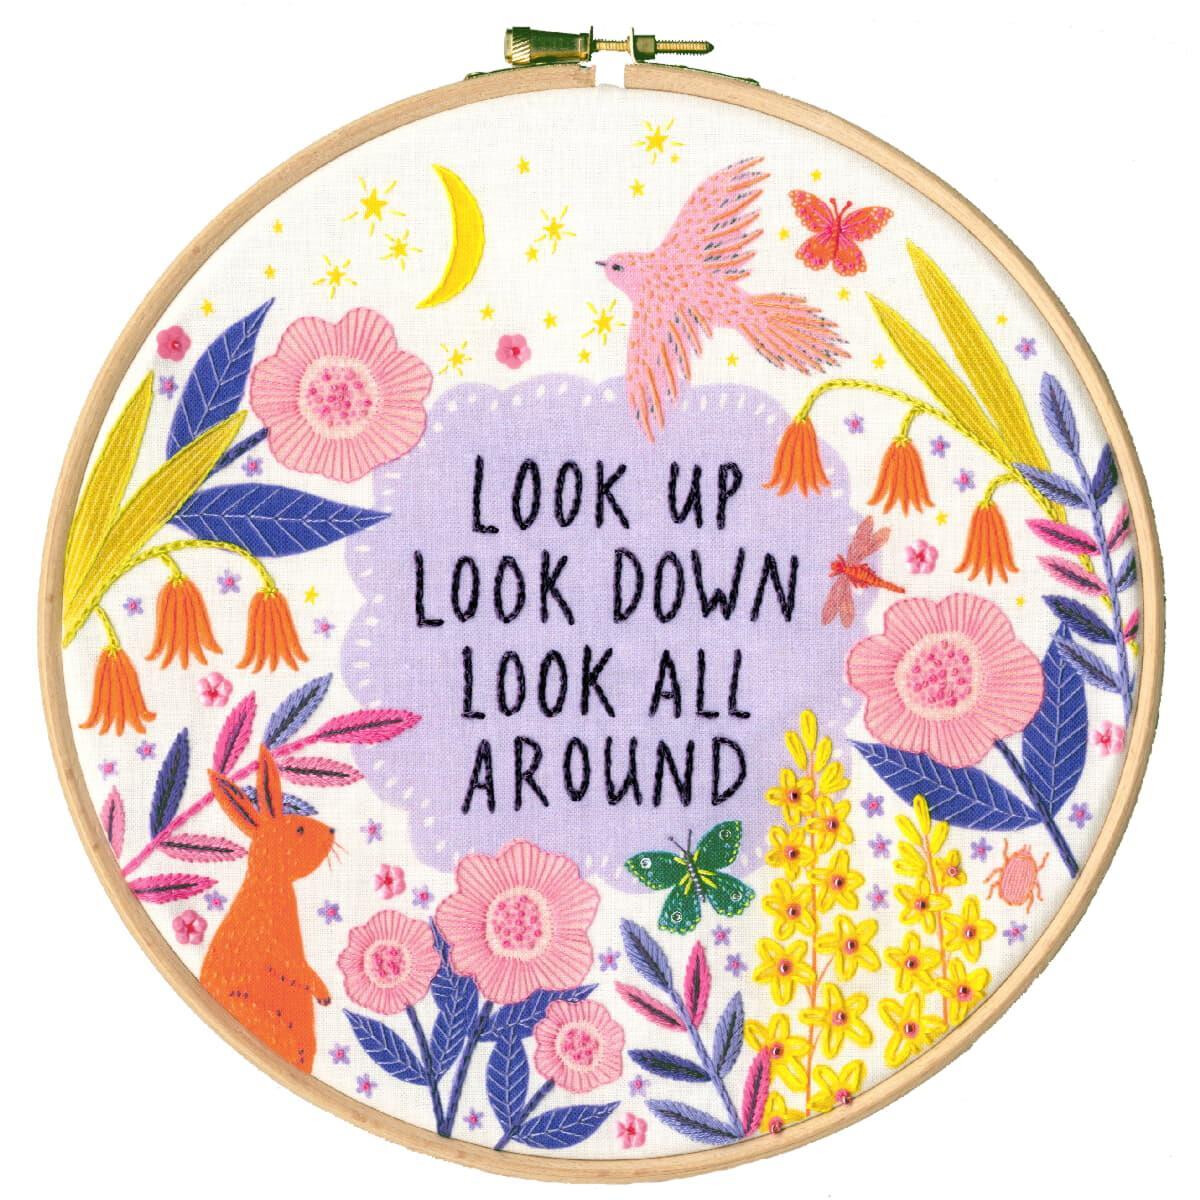 A decorative embroidery hoop with colorful flower...